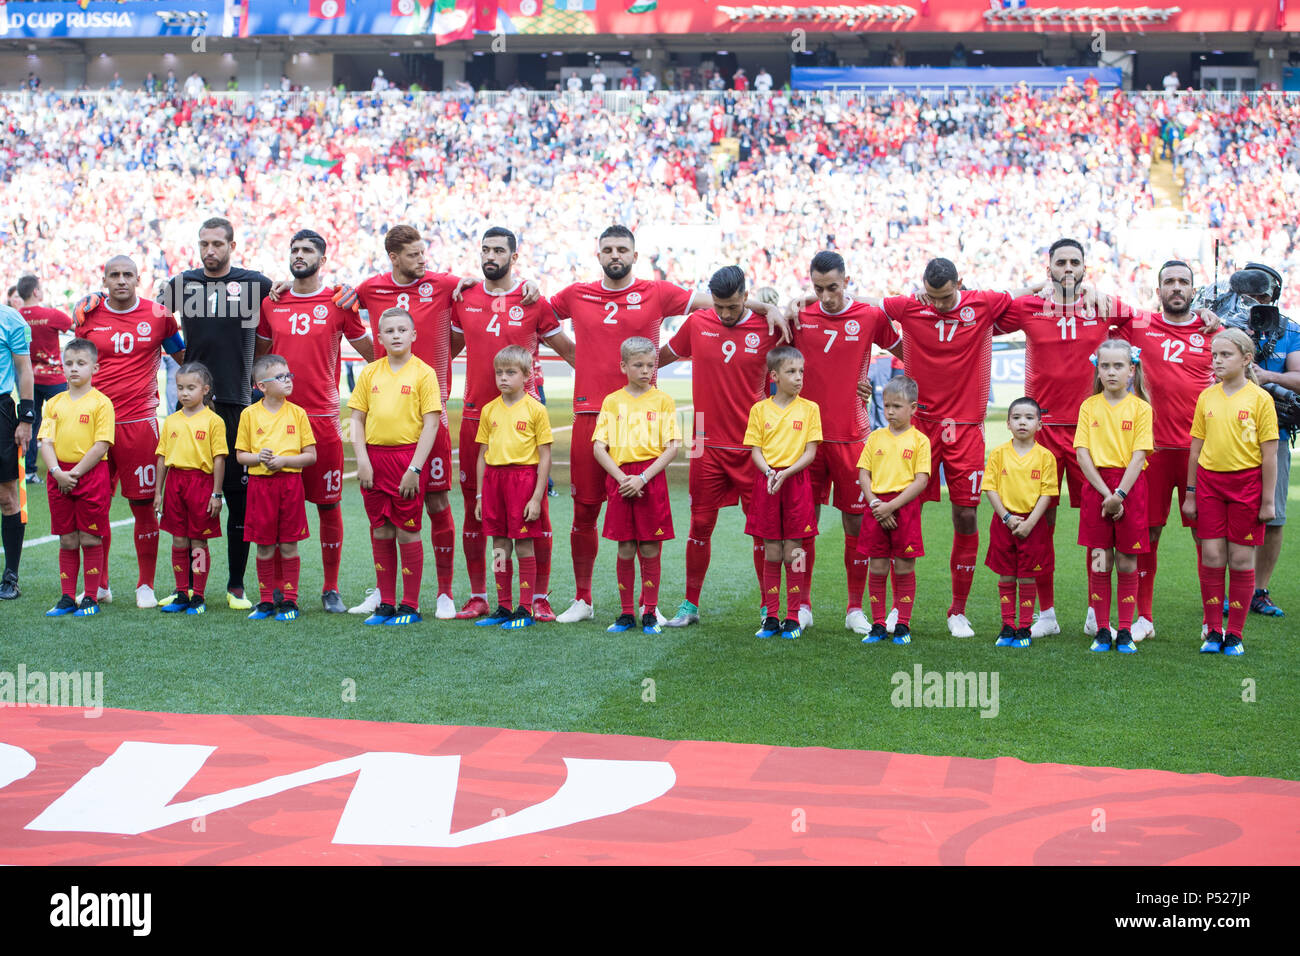 Moscow, Russia. 23rd June, 2018. The Tunisian players stand in line during the presentation, left to rightn.r. Wahbi KHAZRI (DO), goalkeeper Farouk BEN MUSTAPHA (DO), Ferjani SASSI (DO), Fakhreddine BEN YOUSSEF (DO), Yassine MERIAH (DO), Syam BEN YOUSSEF (DO), Anice BADRI (DO), Saifeddine KHAOUI (DO ), Ellyes SKHIRI (DO), Dylan BRONN (DO), Ali MAALOUL (DOUBLE), Whole Figure, Landscape, Belgium (BEL) - Tunisia (TUN) 5: 2, Preliminary Round, Group G, Match 29, on 23.06.2018 in Moscow; Football World Cup 2018 in Russia from 14.06. - 15.07.2018. | usage worldwide Credit: dpa/Alamy Live News Stock Photo